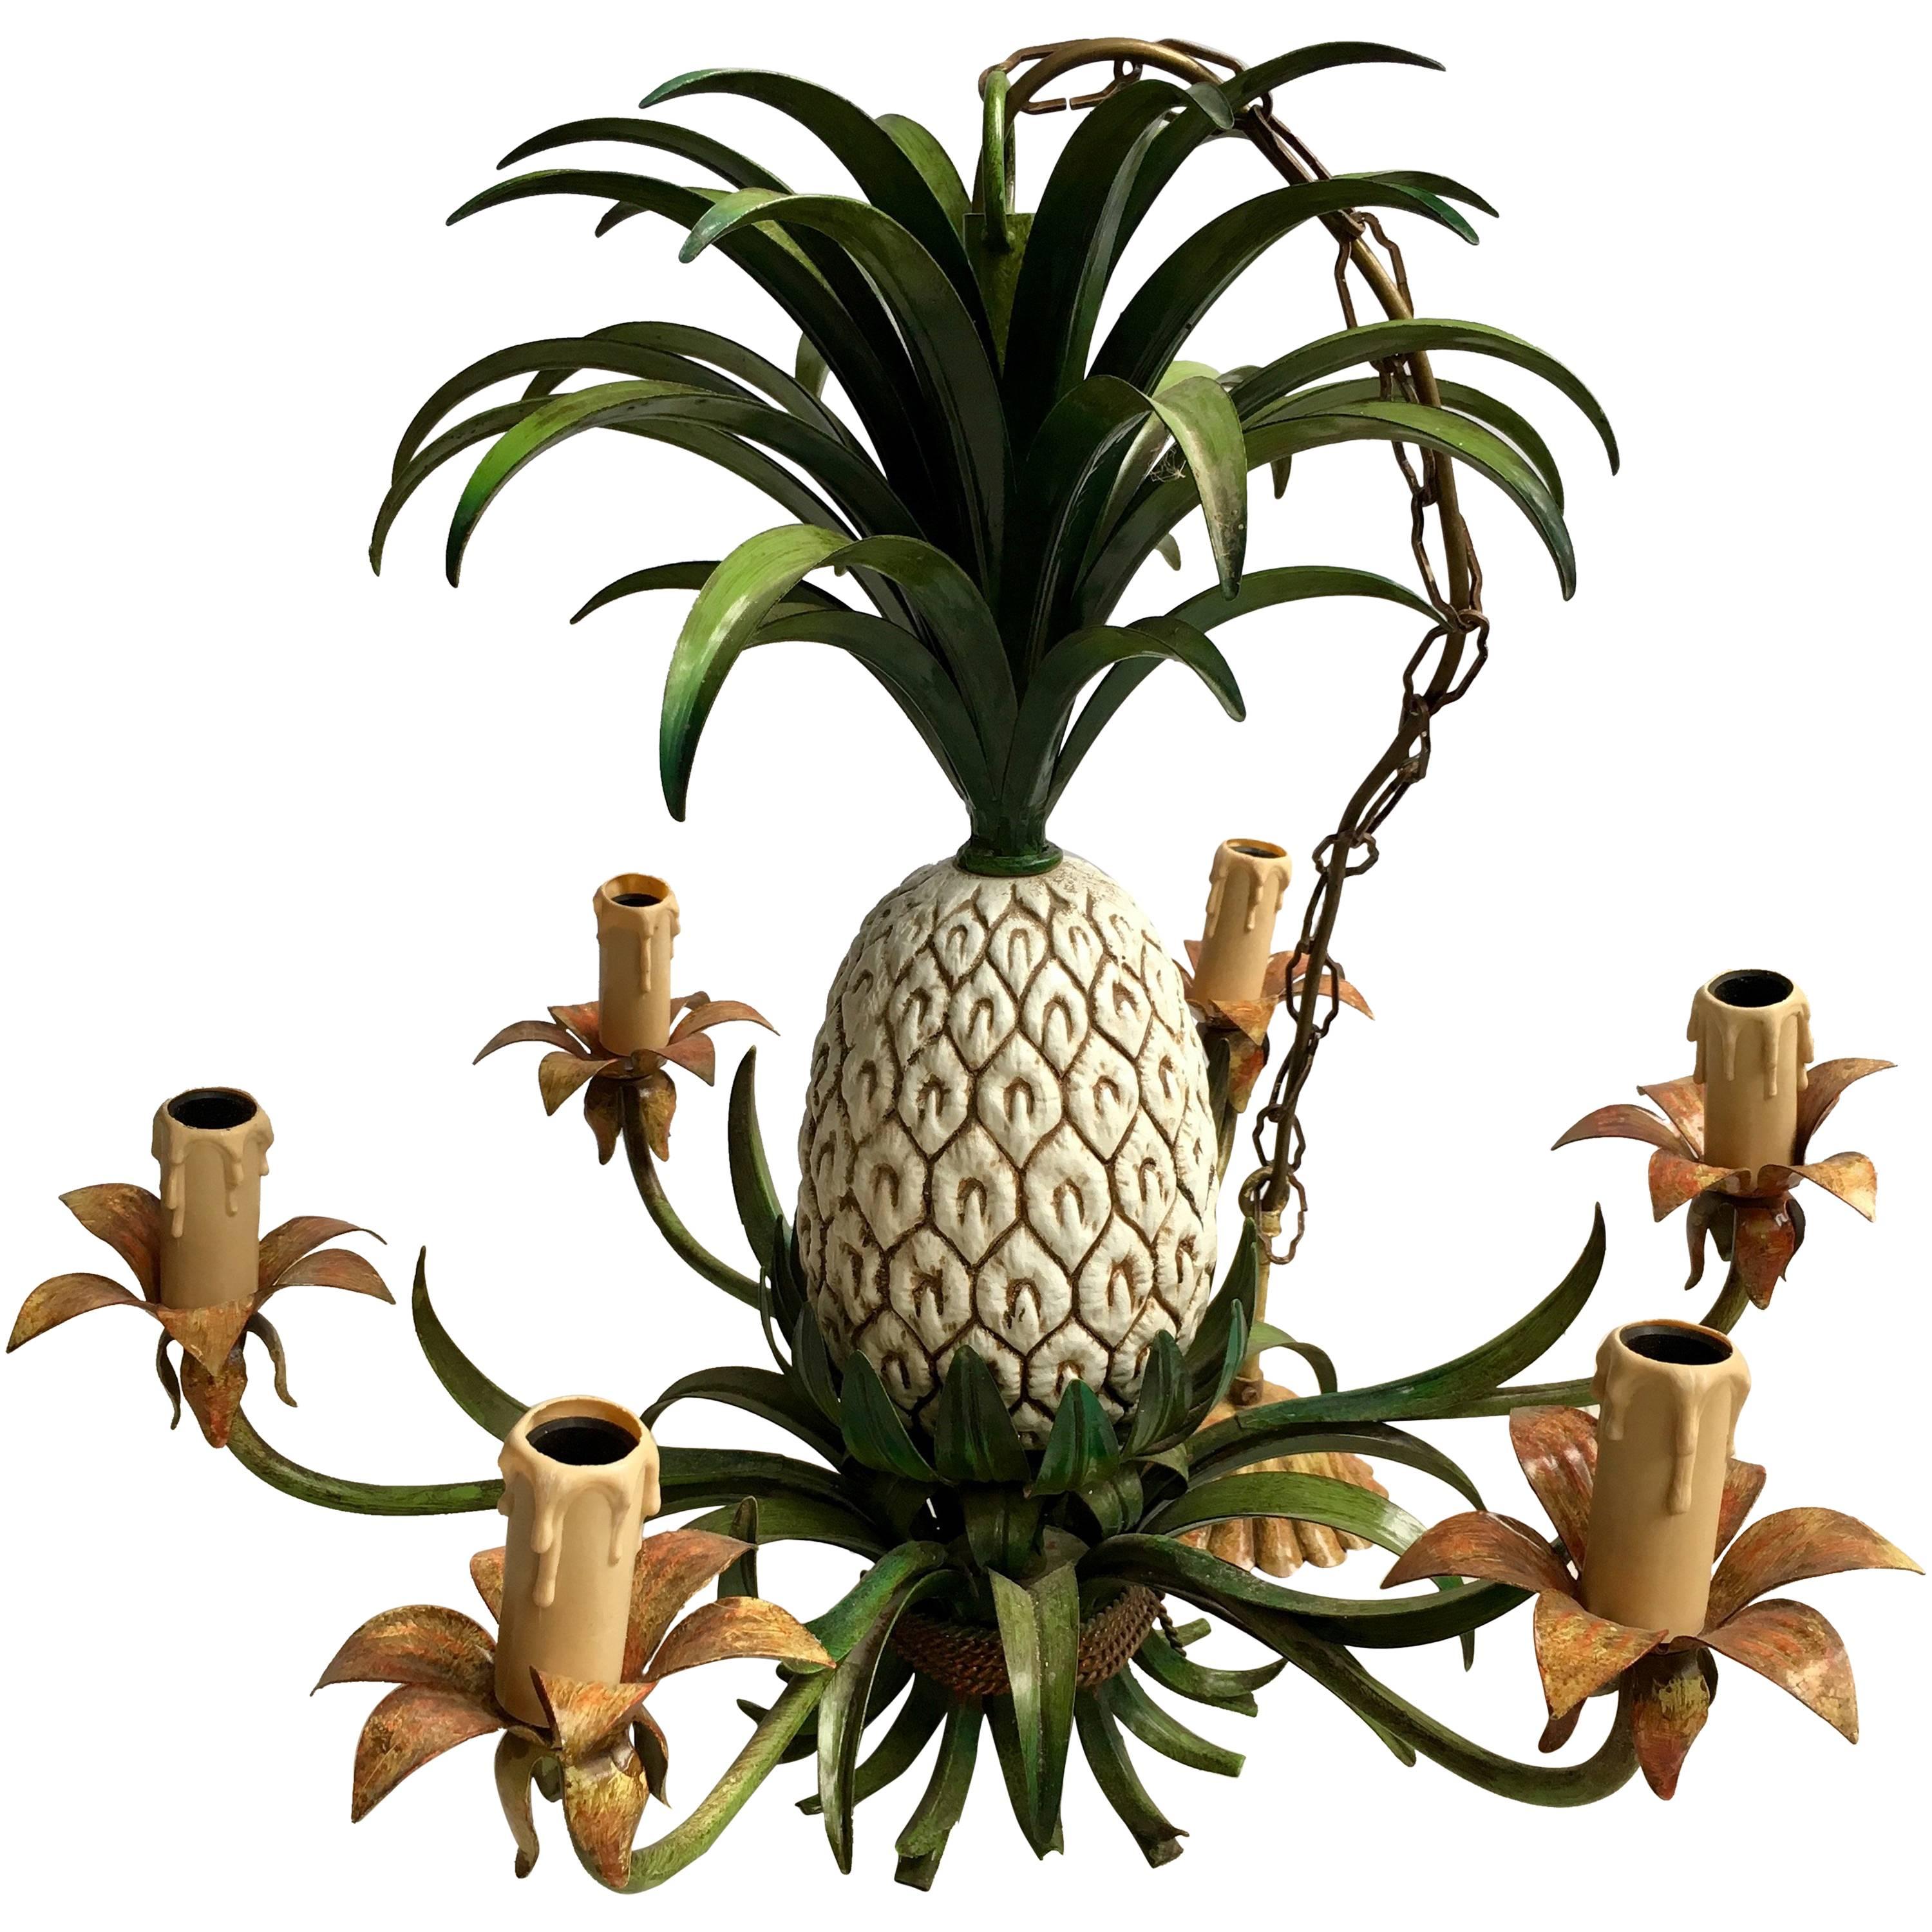 Vintage French Tole Pineapple Chandelier